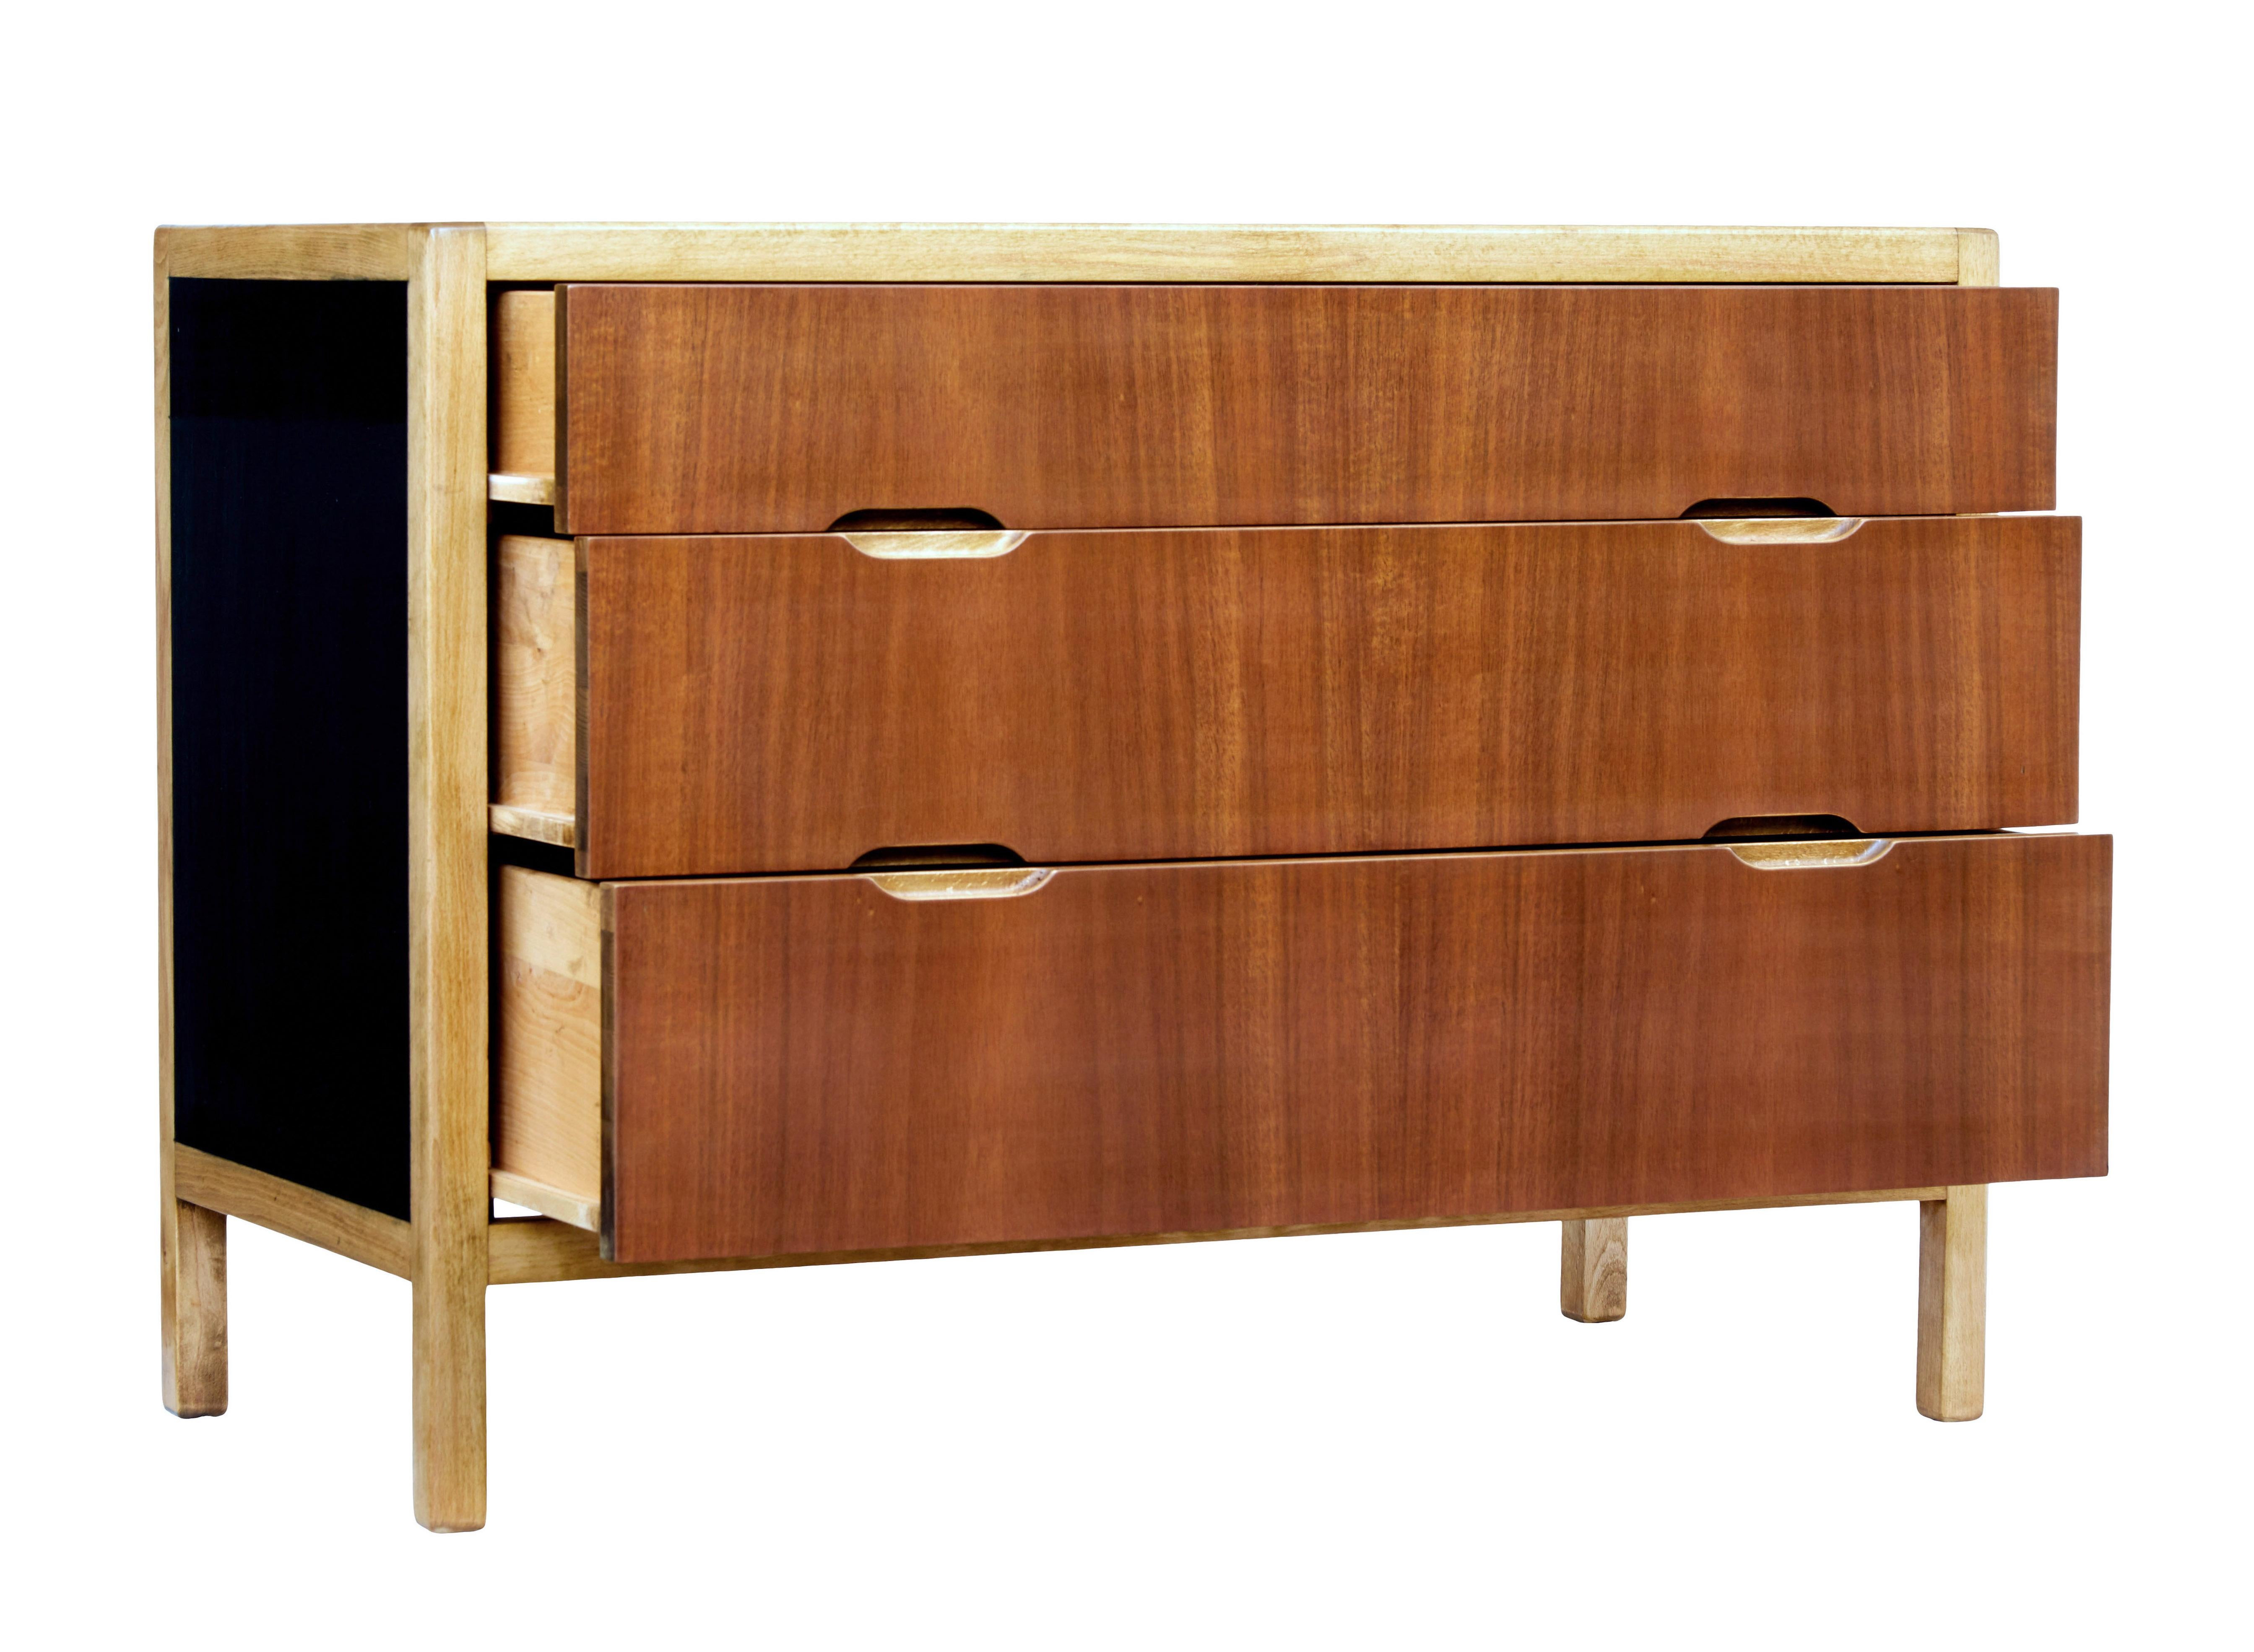 Good quality Swedish chest of drawers by Forenades Mobler of Linkoping circa 1960.

Outer birch frame with ebonised side and top panels, complete with contrasting teak drawer fronts with inset handles.

Stamped on the reverse forenades mobler